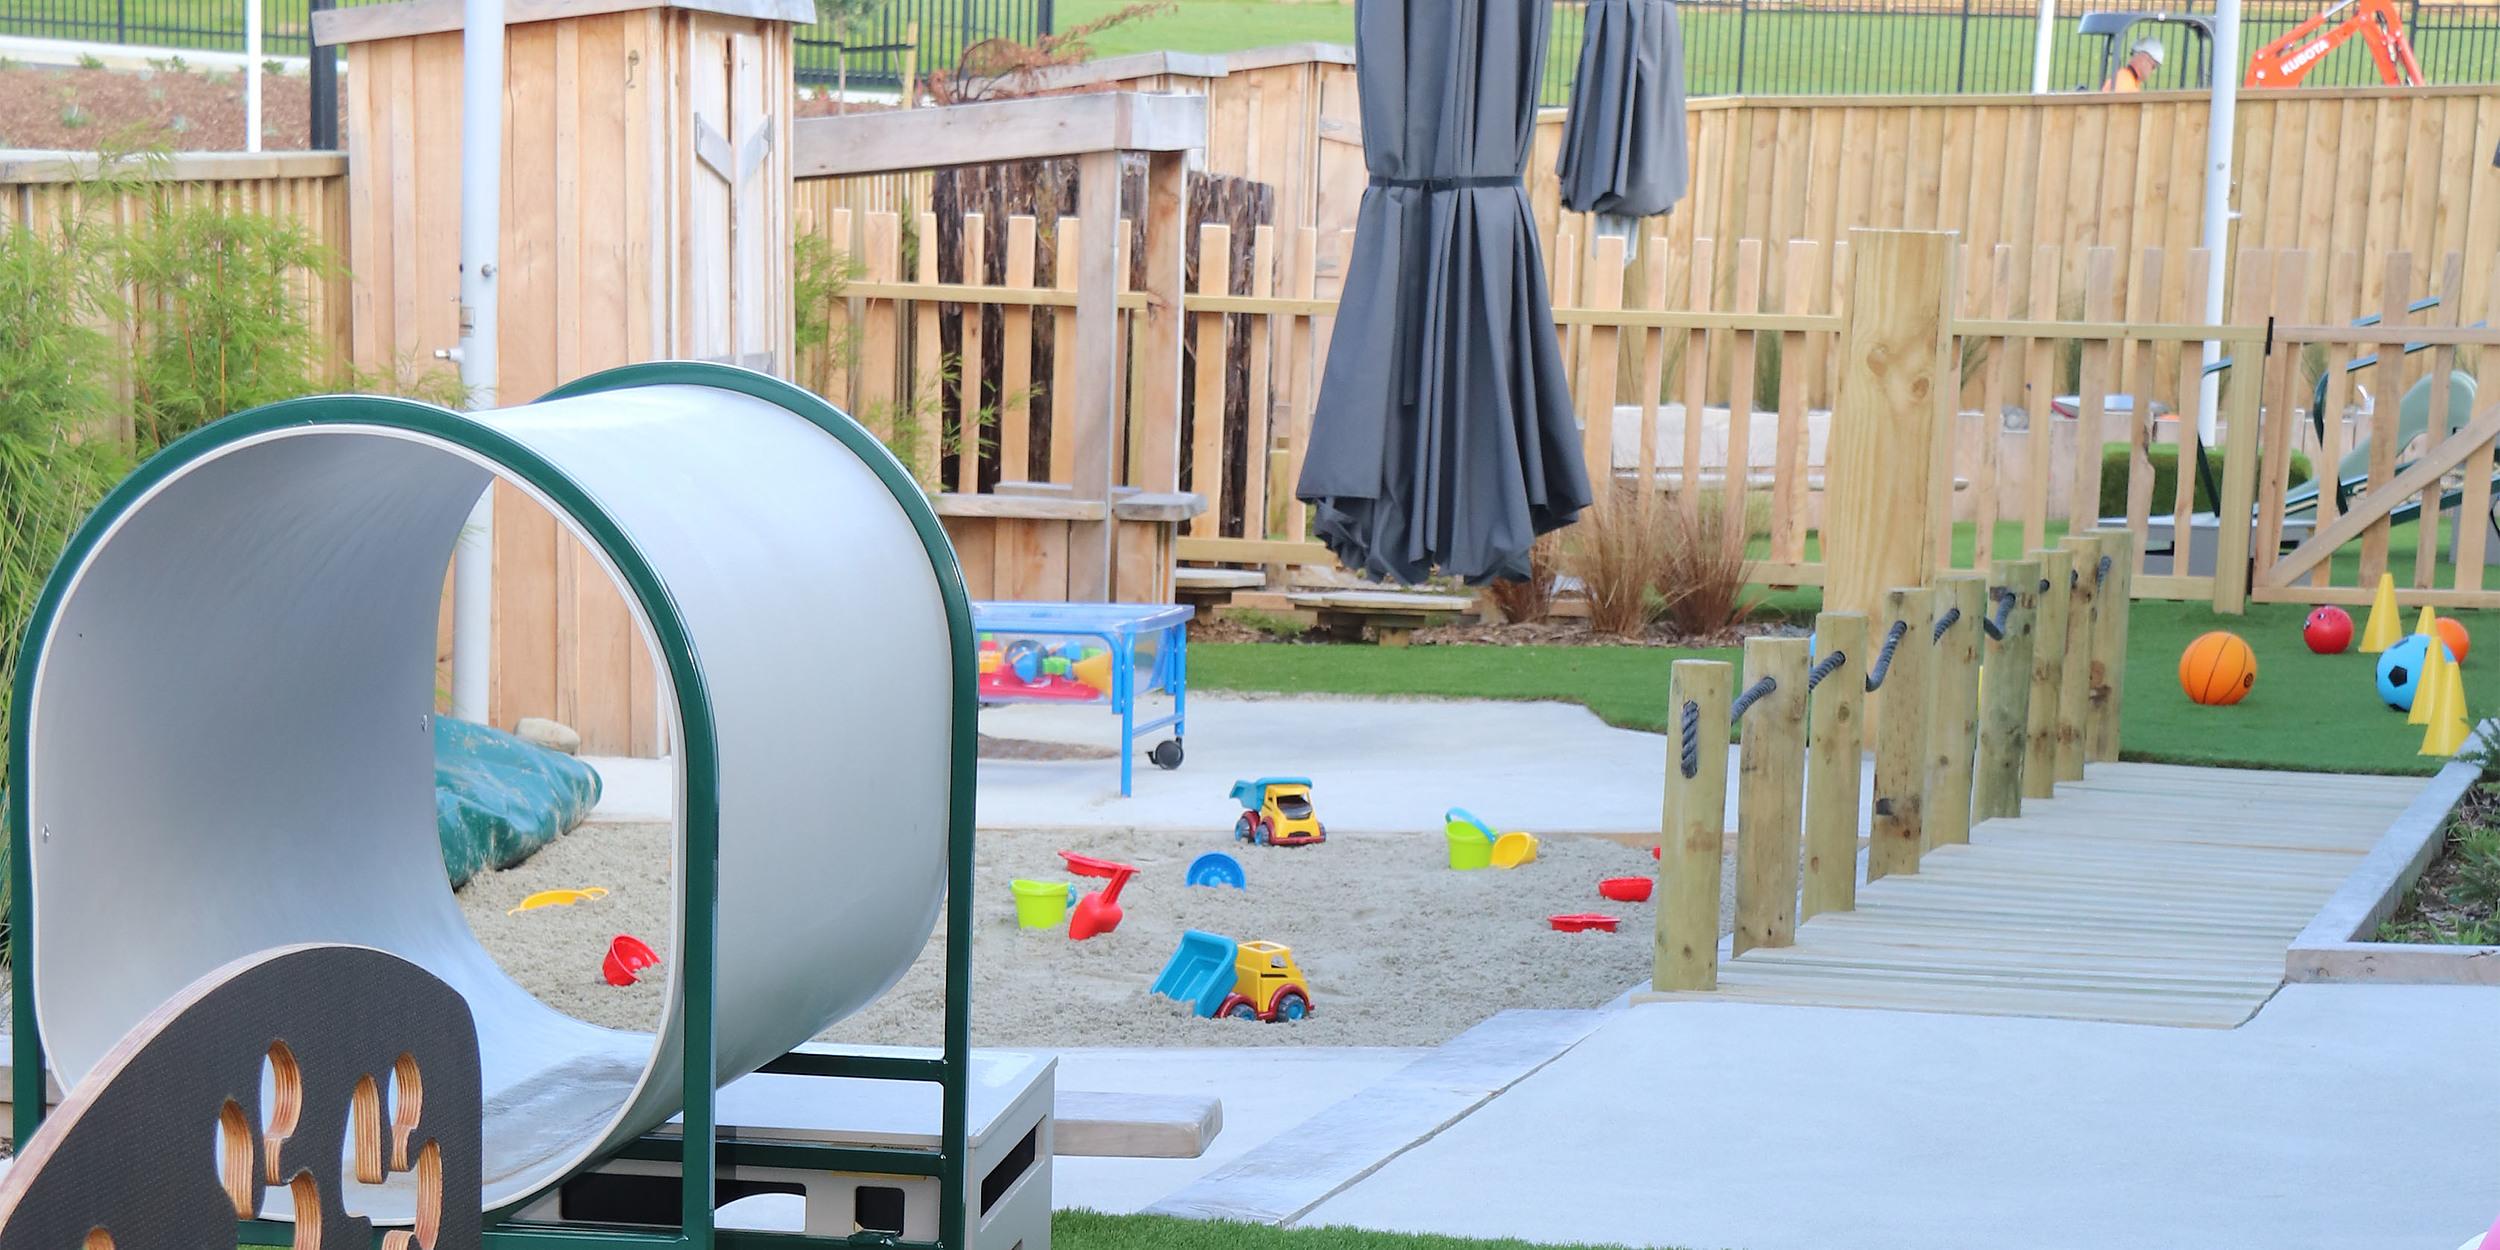 outdoor play area - sandpit